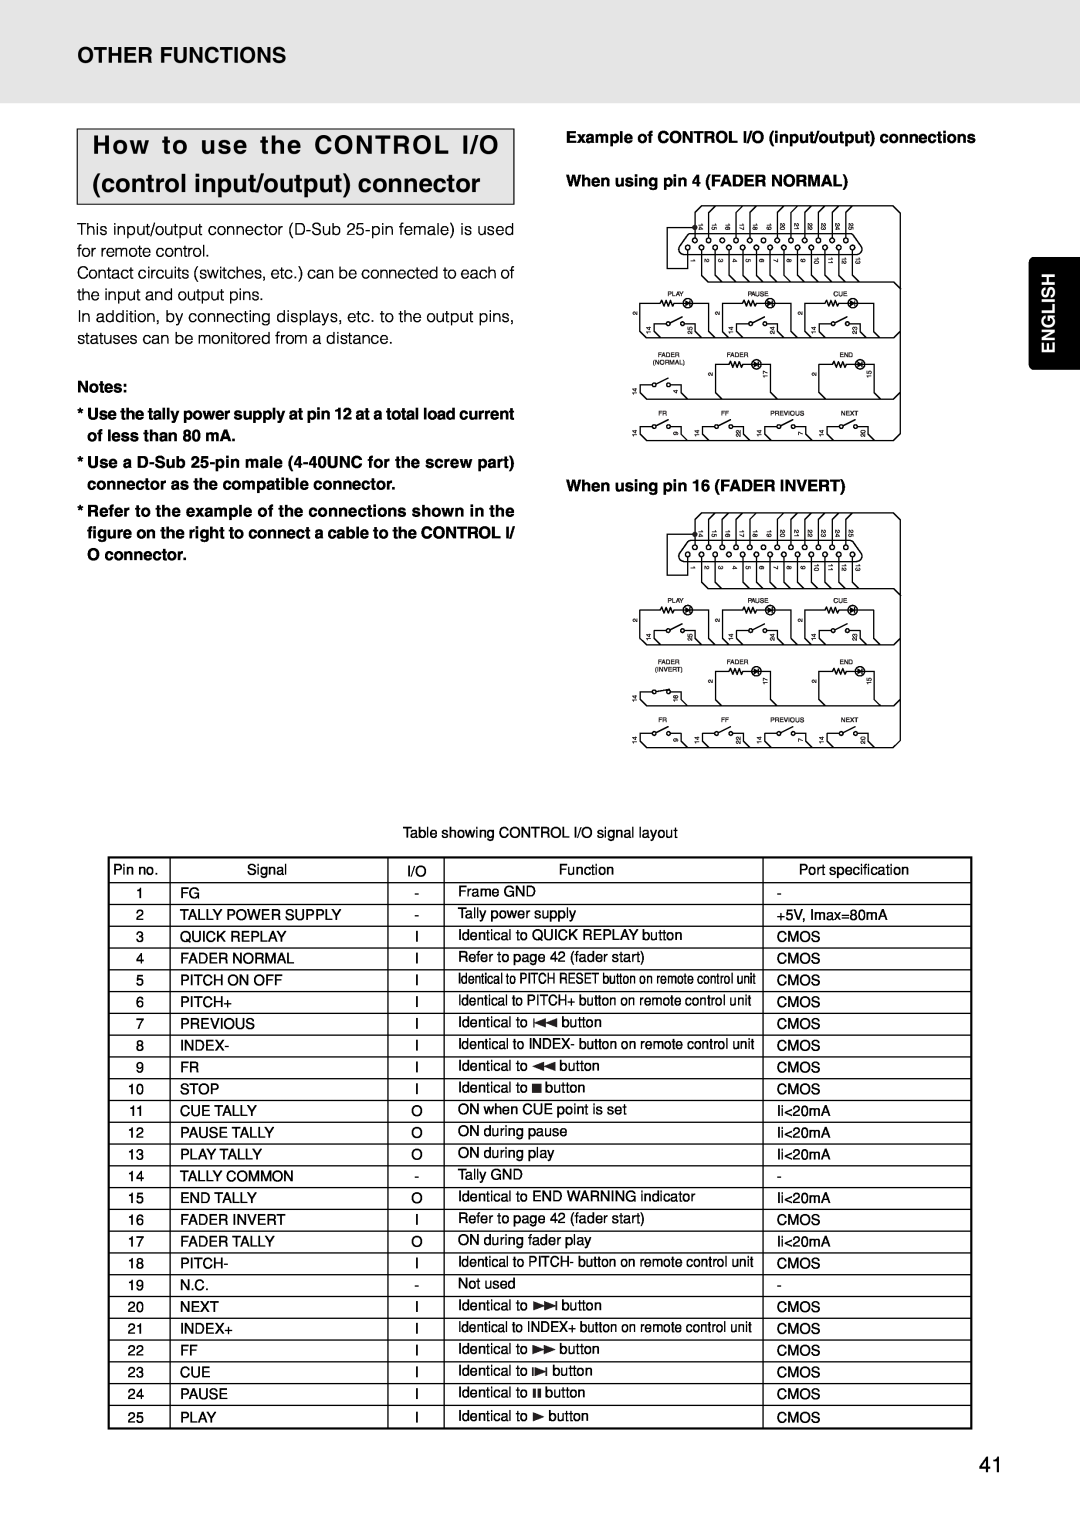 Marantz PMD325 manual How to use the CONTROL I/O, control input/output connector, Other Functions, English 